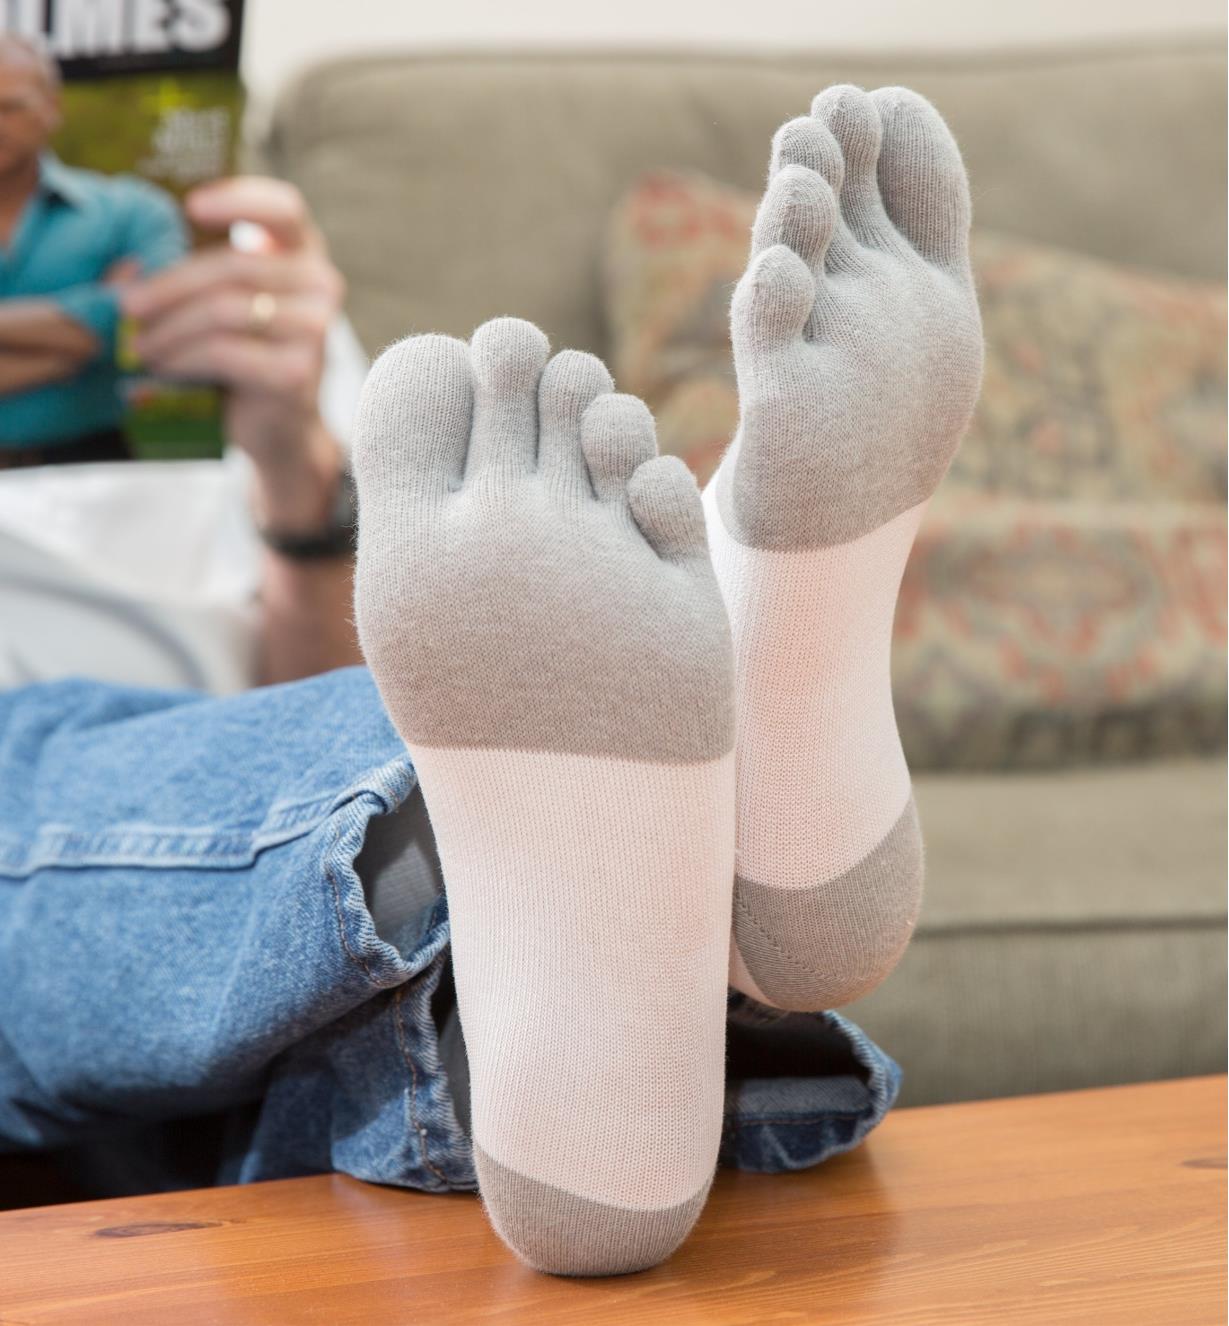 Woman wearing White/Gray Toe Socks with feet resting on coffee table